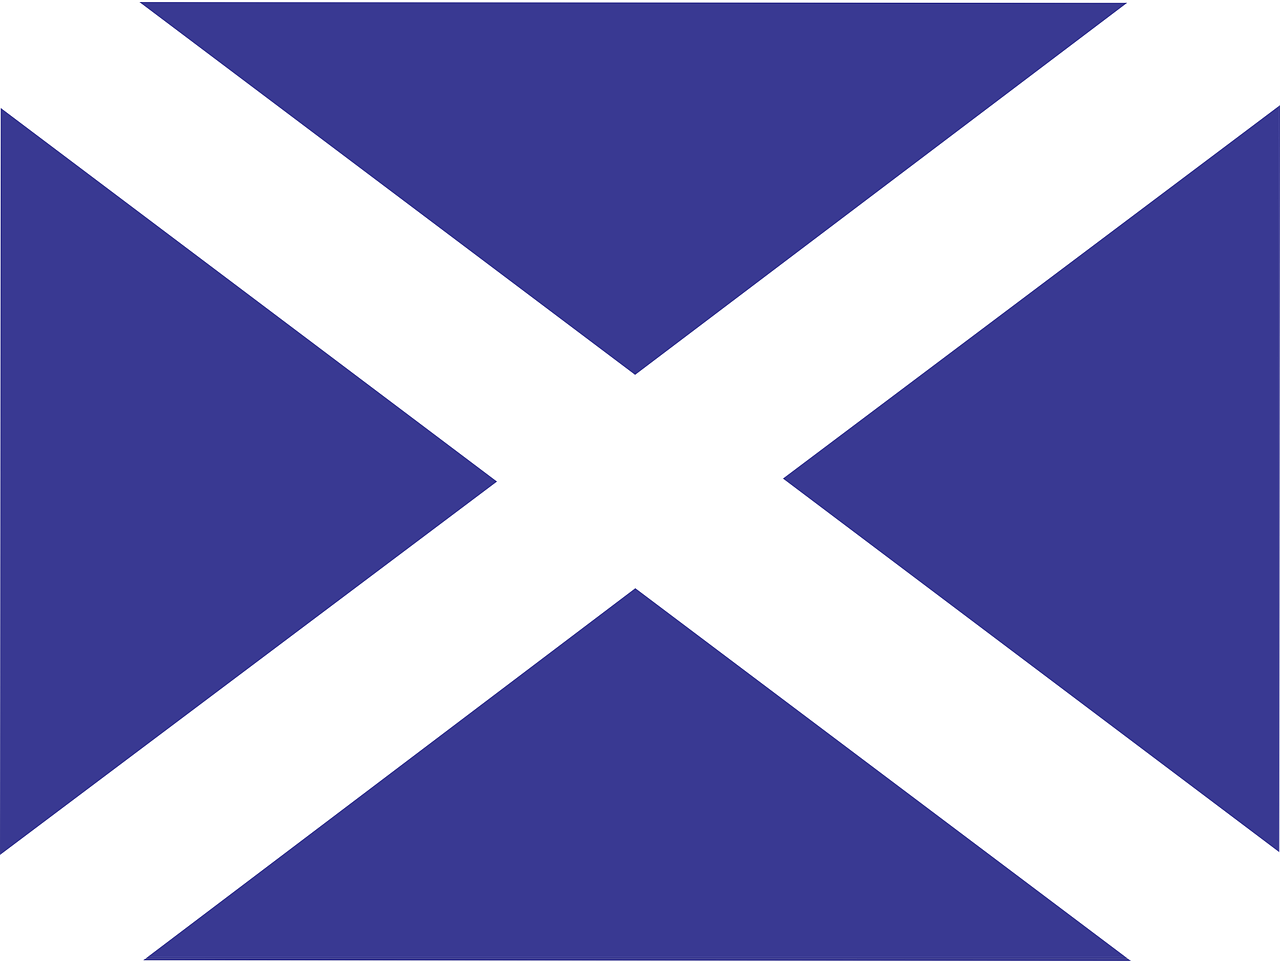 the flag of scotland is white on a blue background